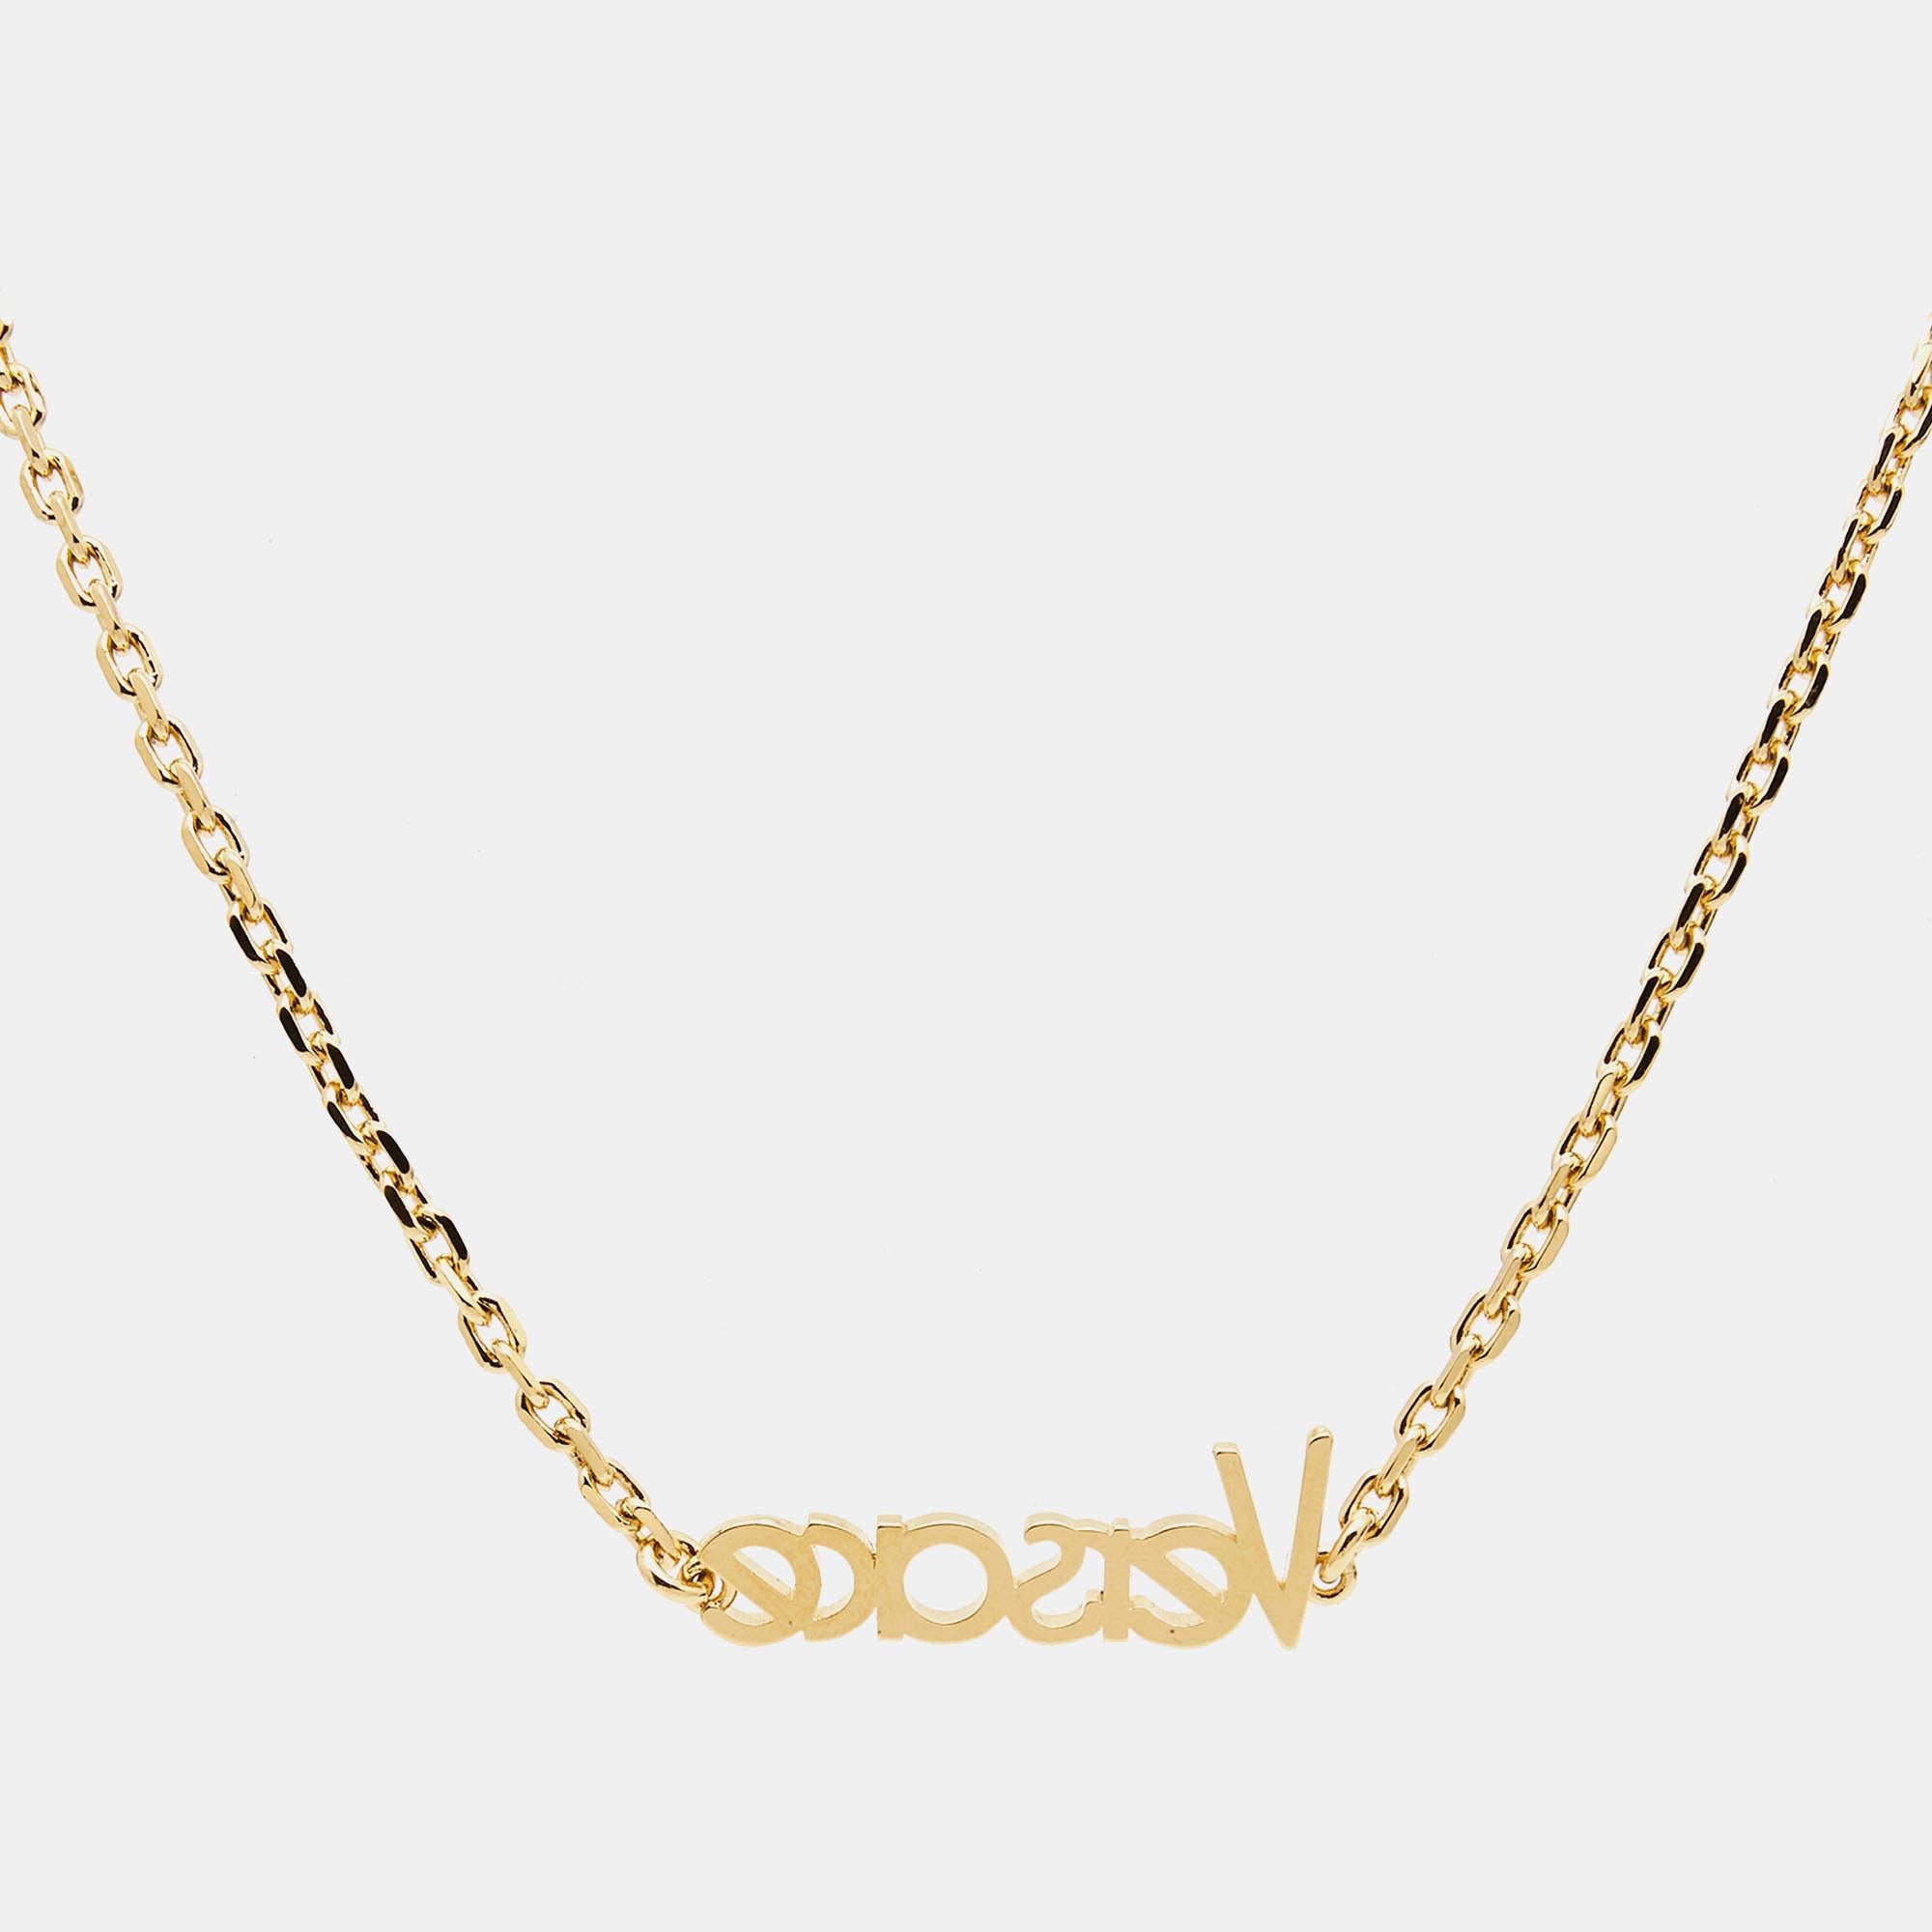 Define your neck with this super-stylish necklace by Versace. It is a masterfully crafted creation that promises to hold its beauty and value for a long time.

Includes: Original Box, Original Case

